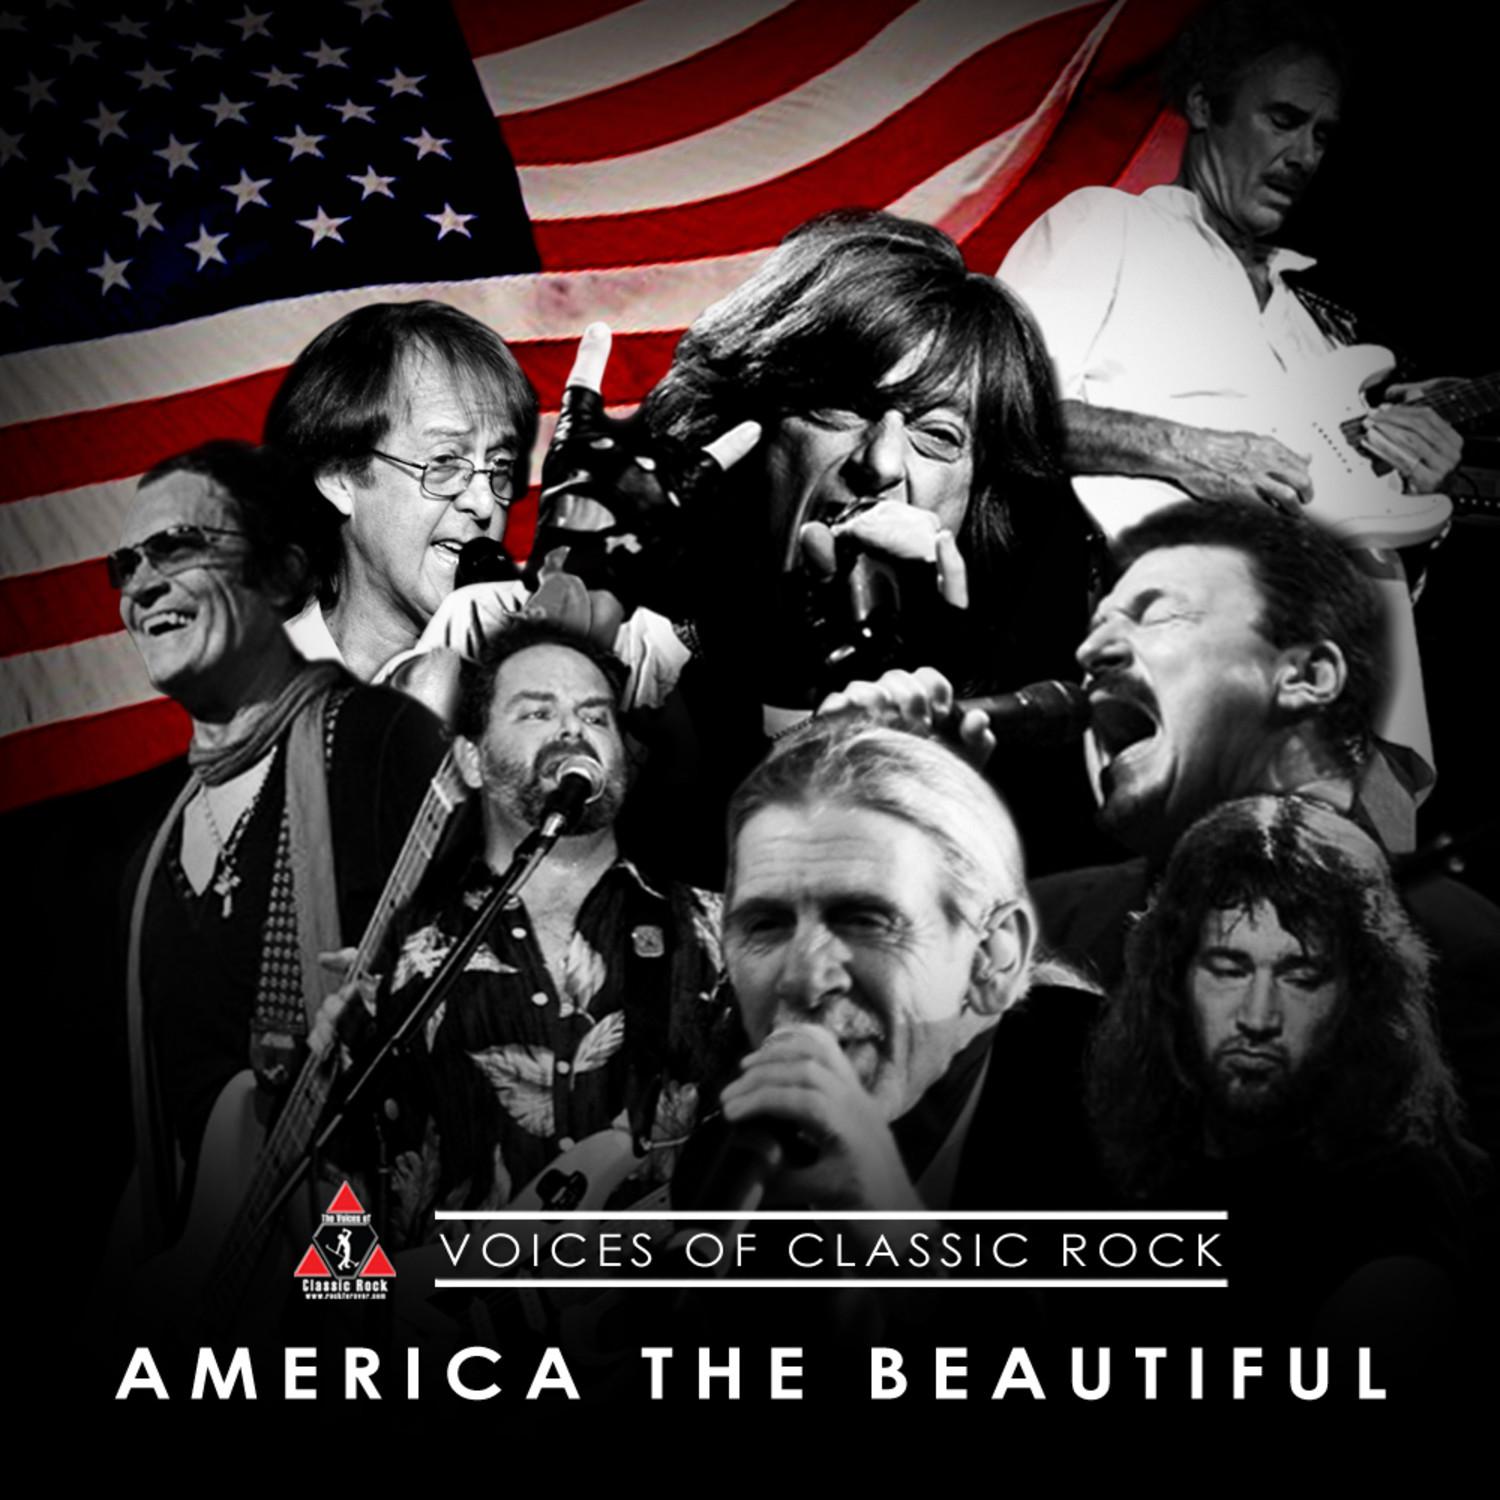 Voices For America "America The Beautiful" Ft. The Voices Of Classic Rock